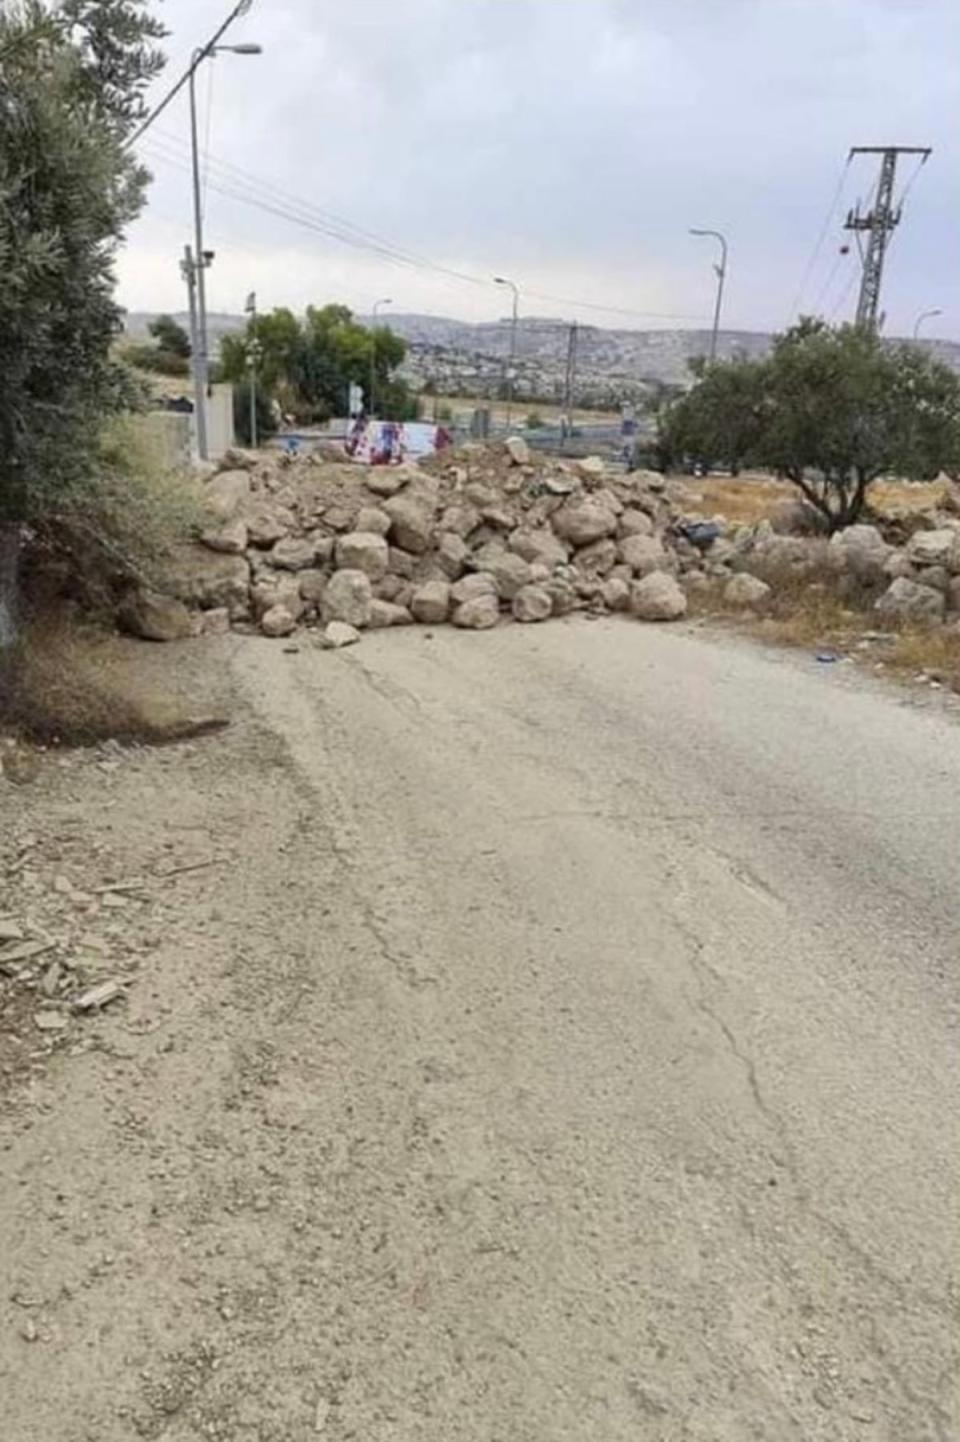 Rubble and concrete boulders block a road in Bayt Ta’mar, a village near Bethlehem (Saed)